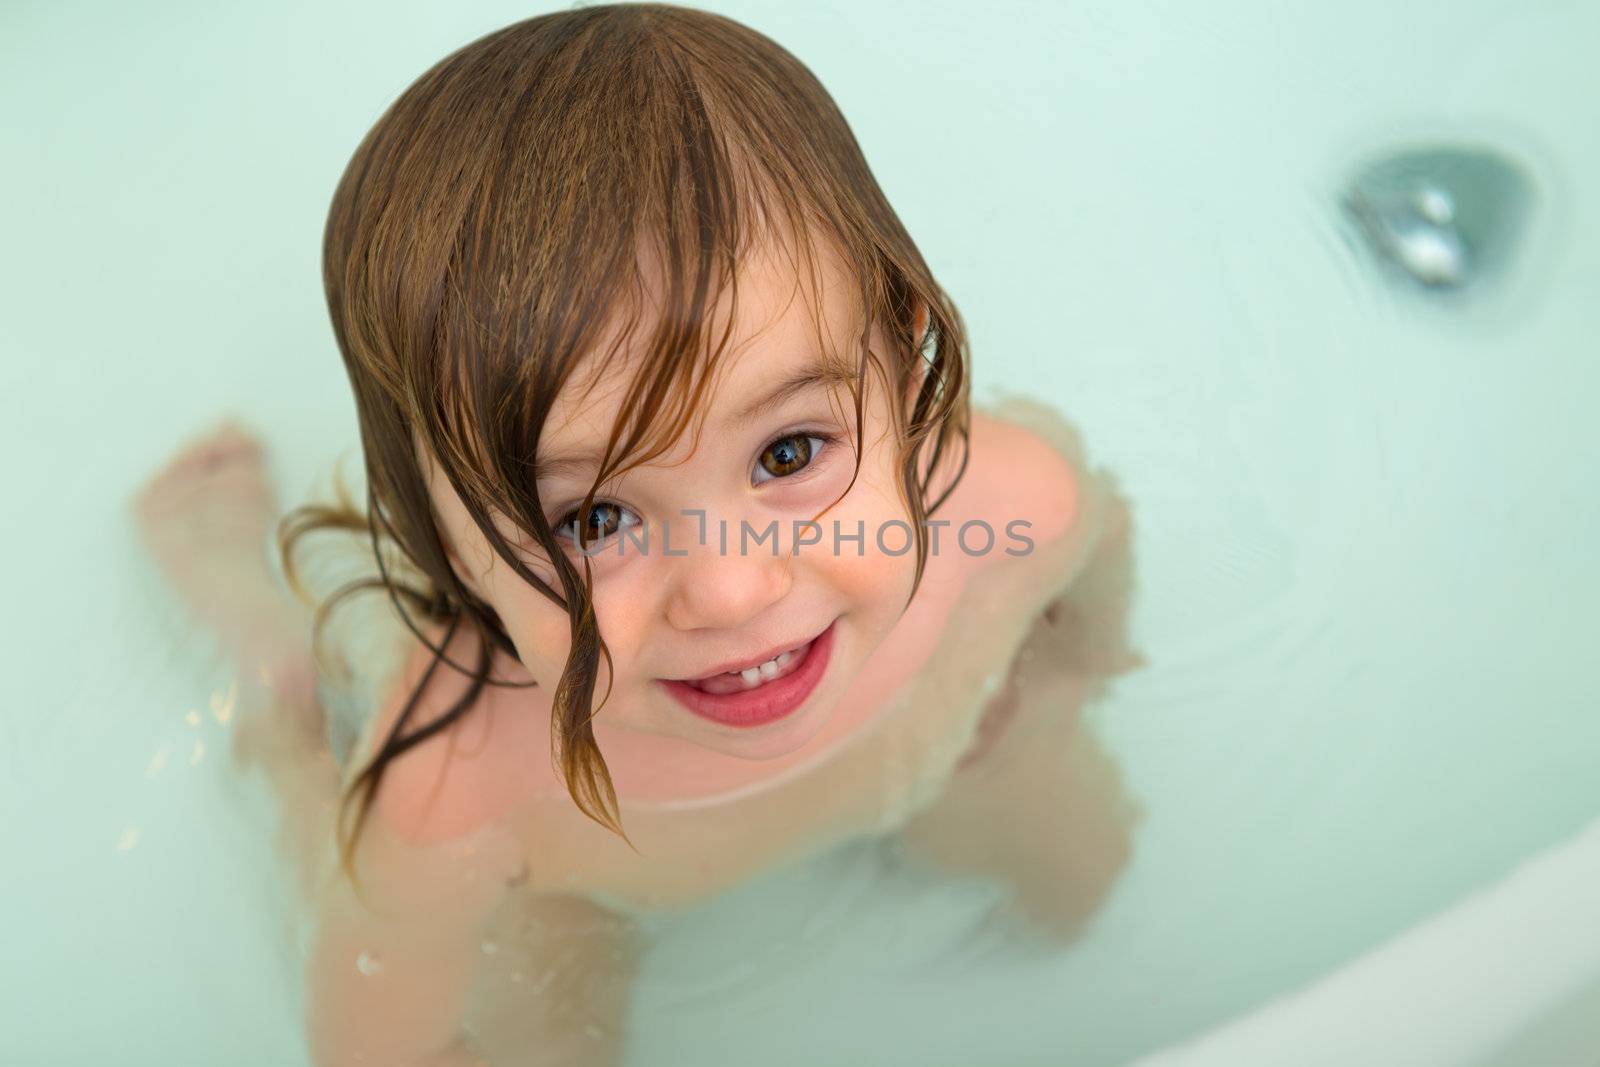 Toddler looking up from the bath tub happily and trustfully, waiting for the soap come.







Waiting for my Soap